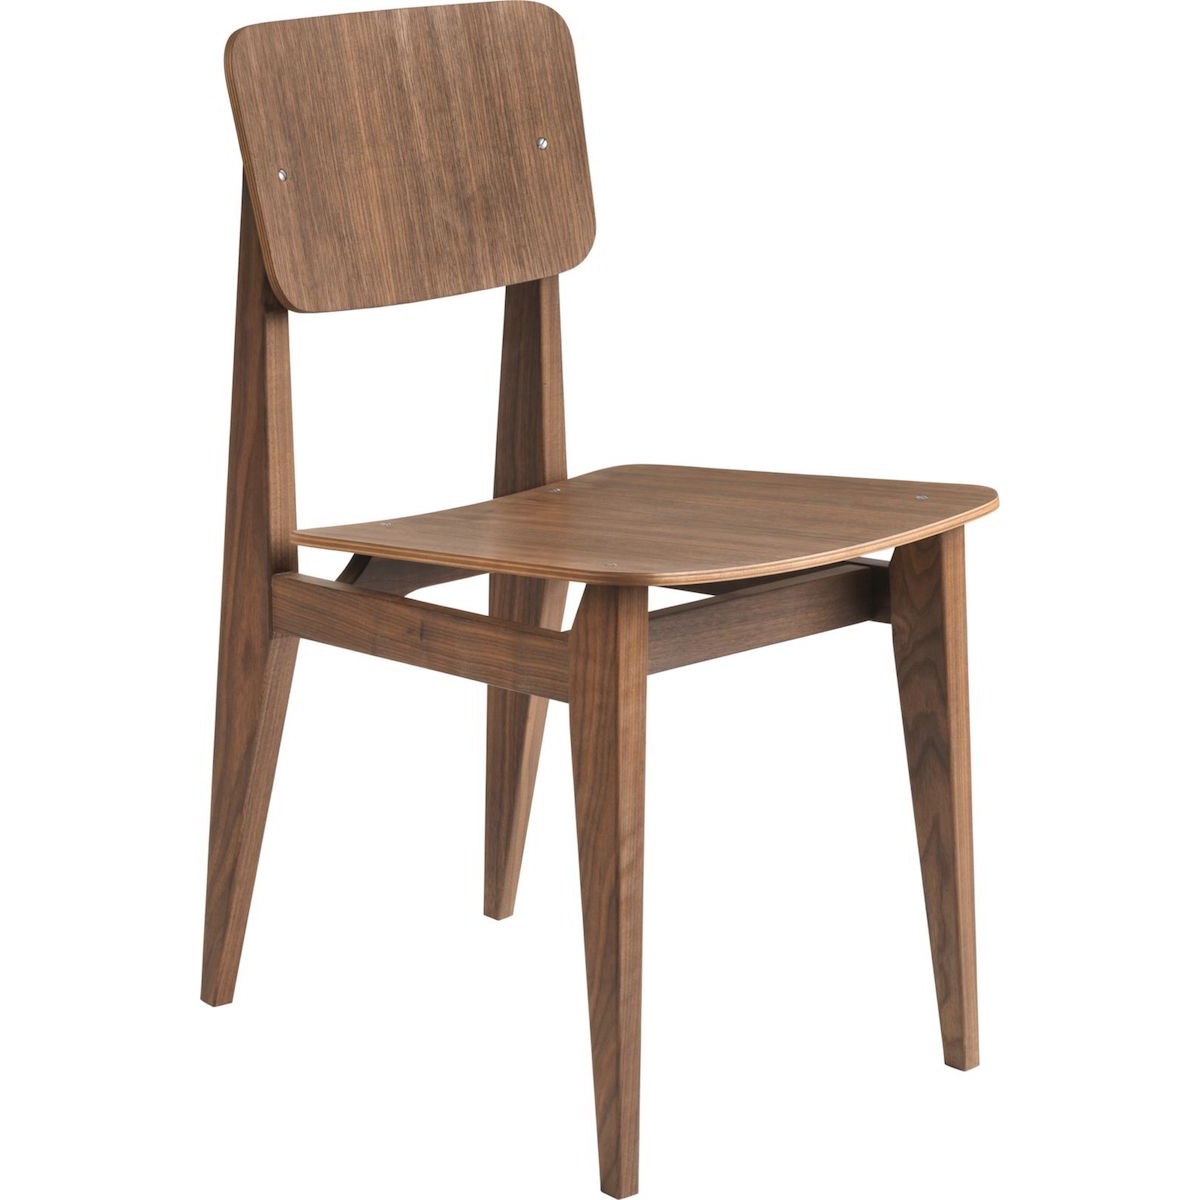 Oiled American Walnut, wooden seat & back – C-Chair